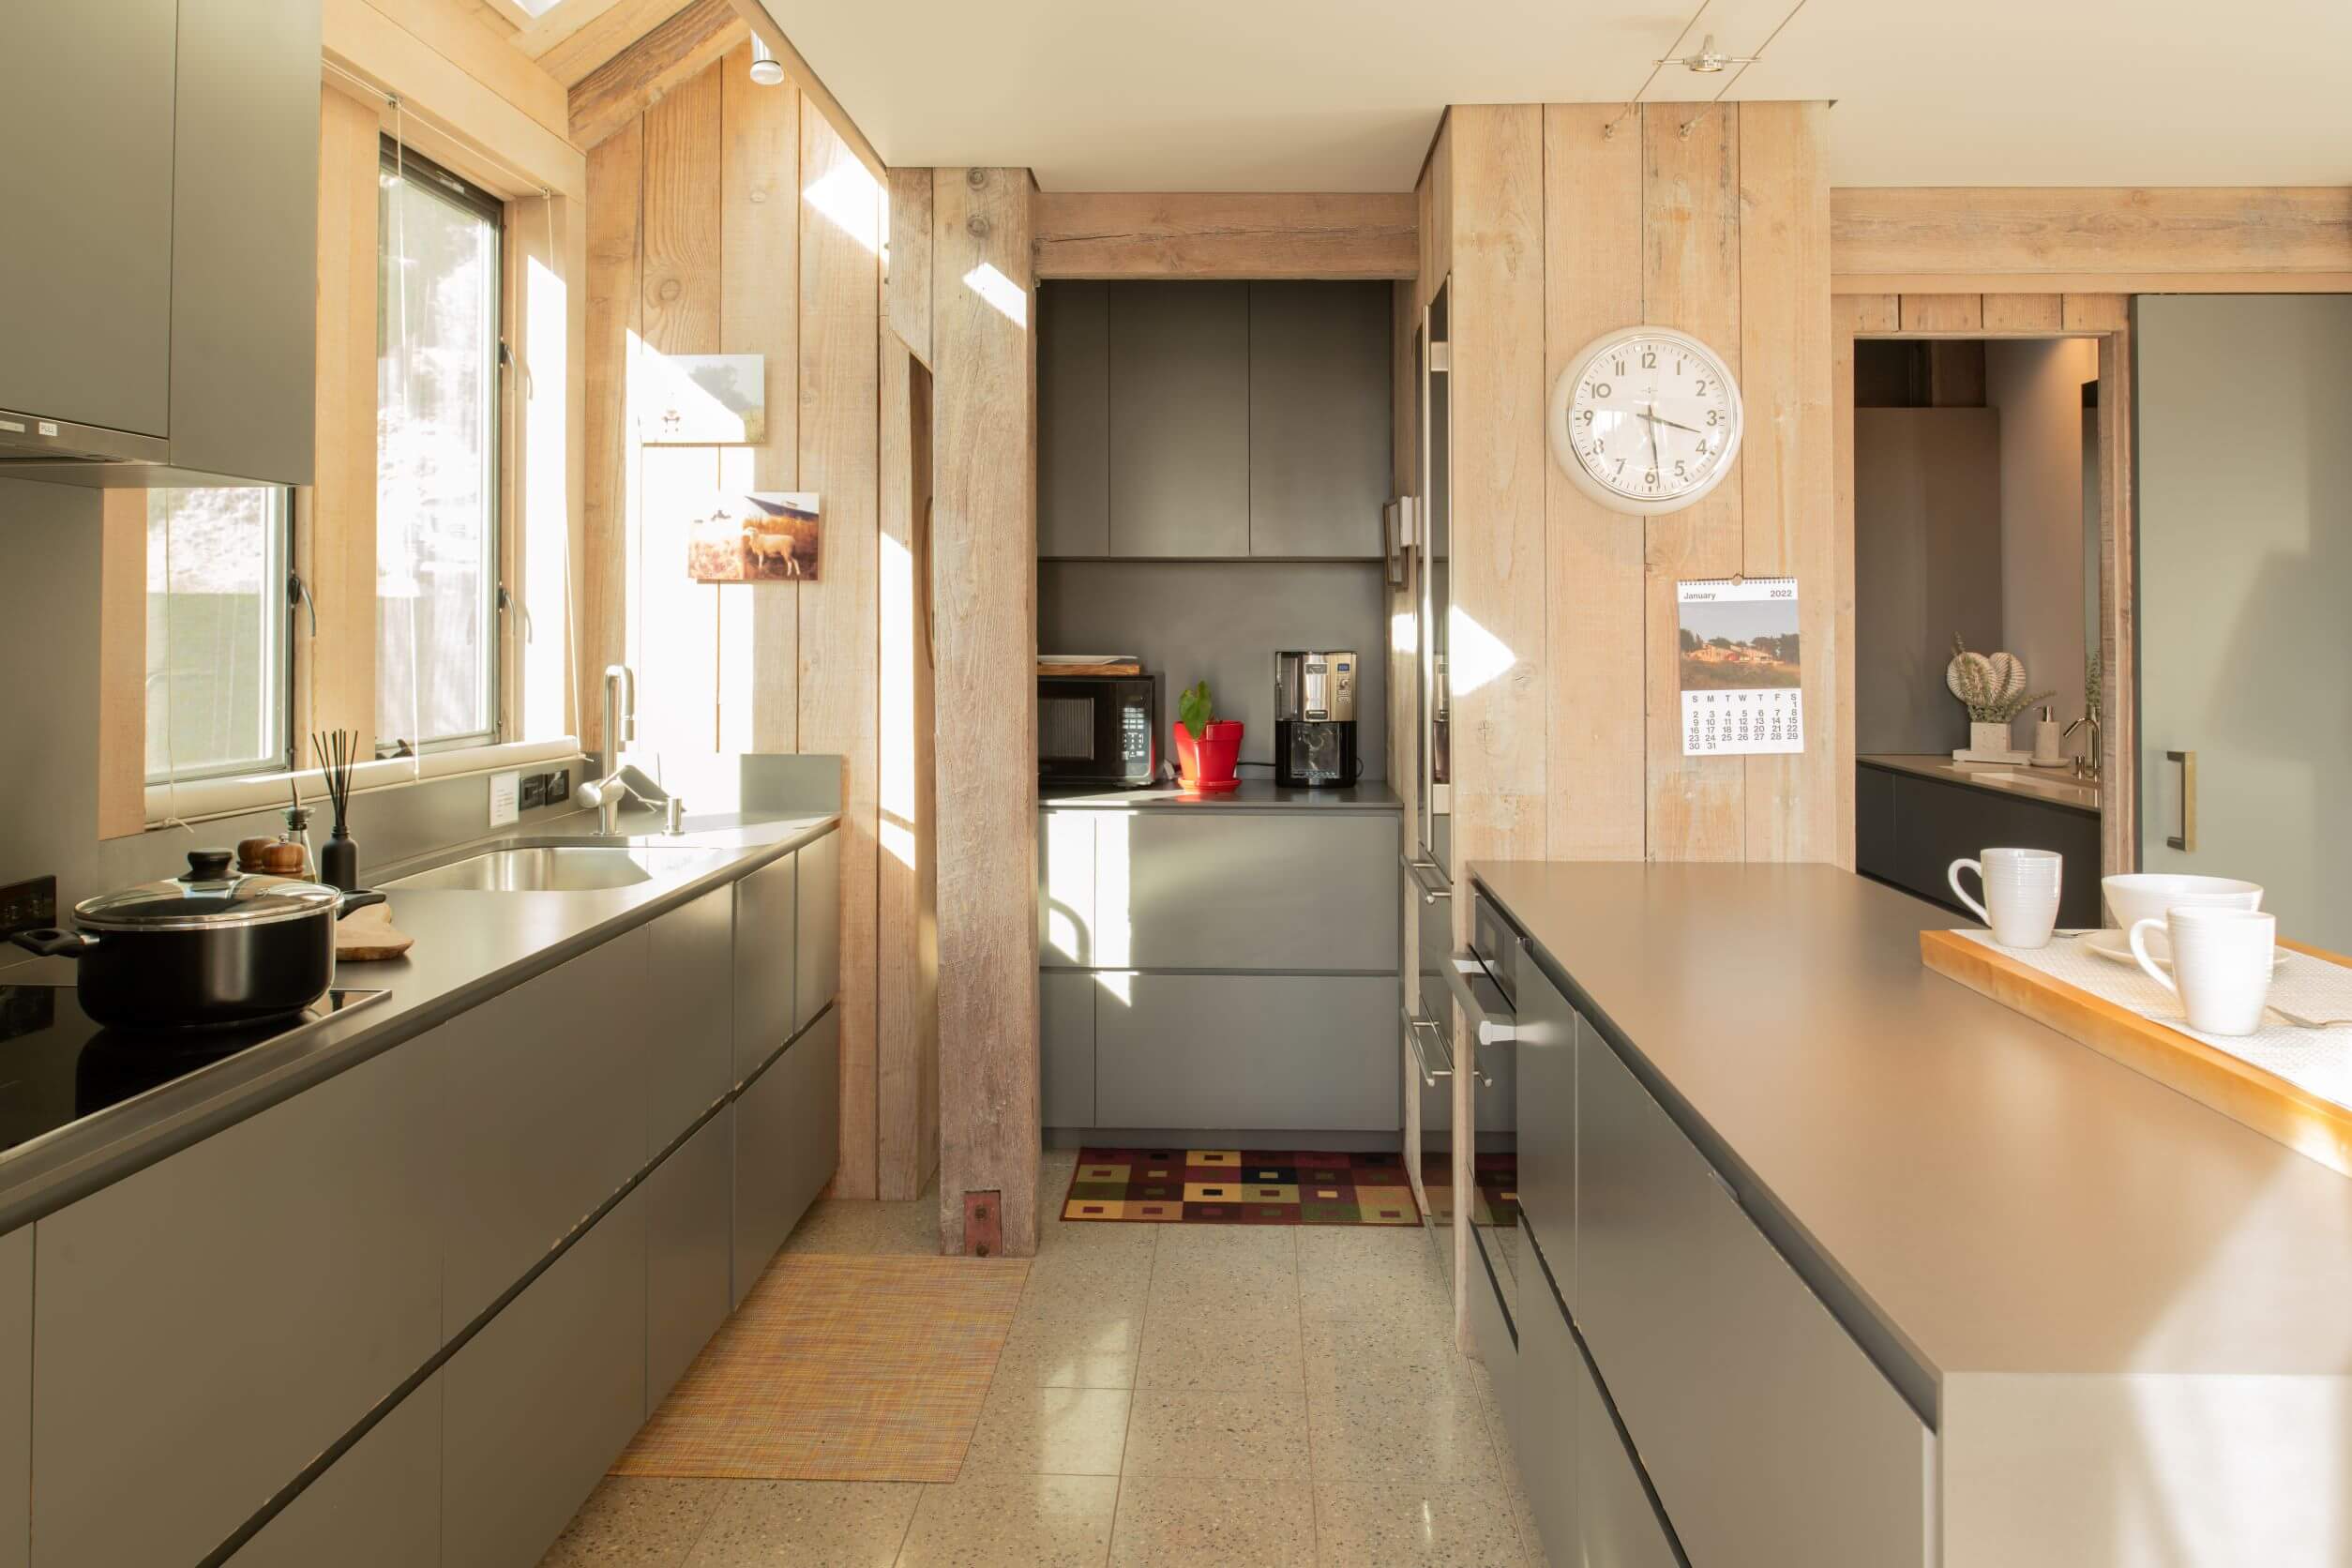 Seaview: bright kitchen with sleek gray counters and wood walls.